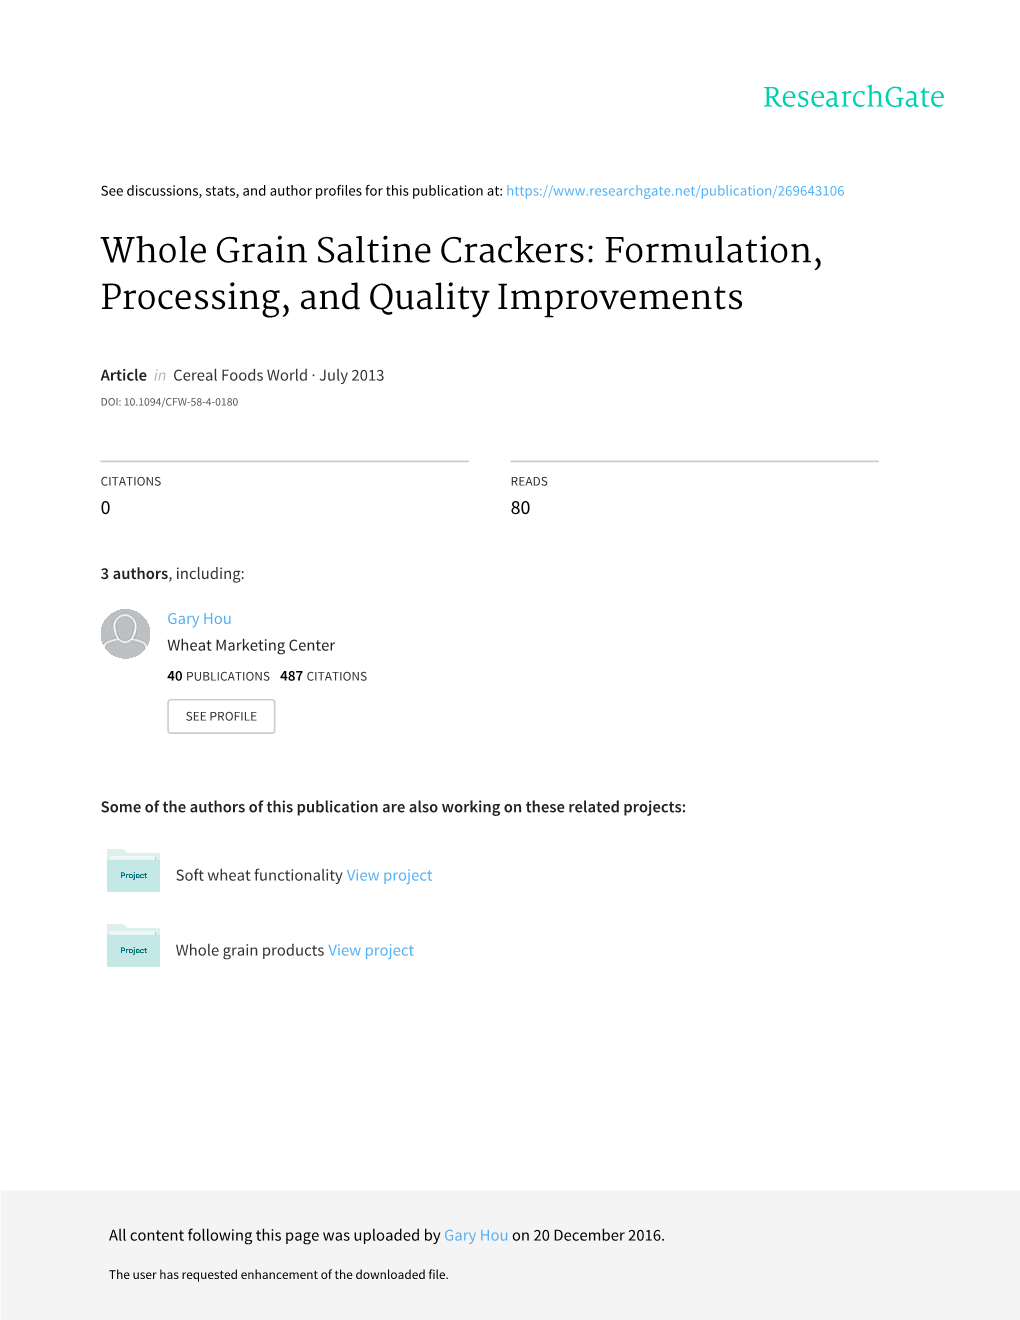 Whole Grain Saltine Crackers: Formulation, Processing, and Quality Improvements